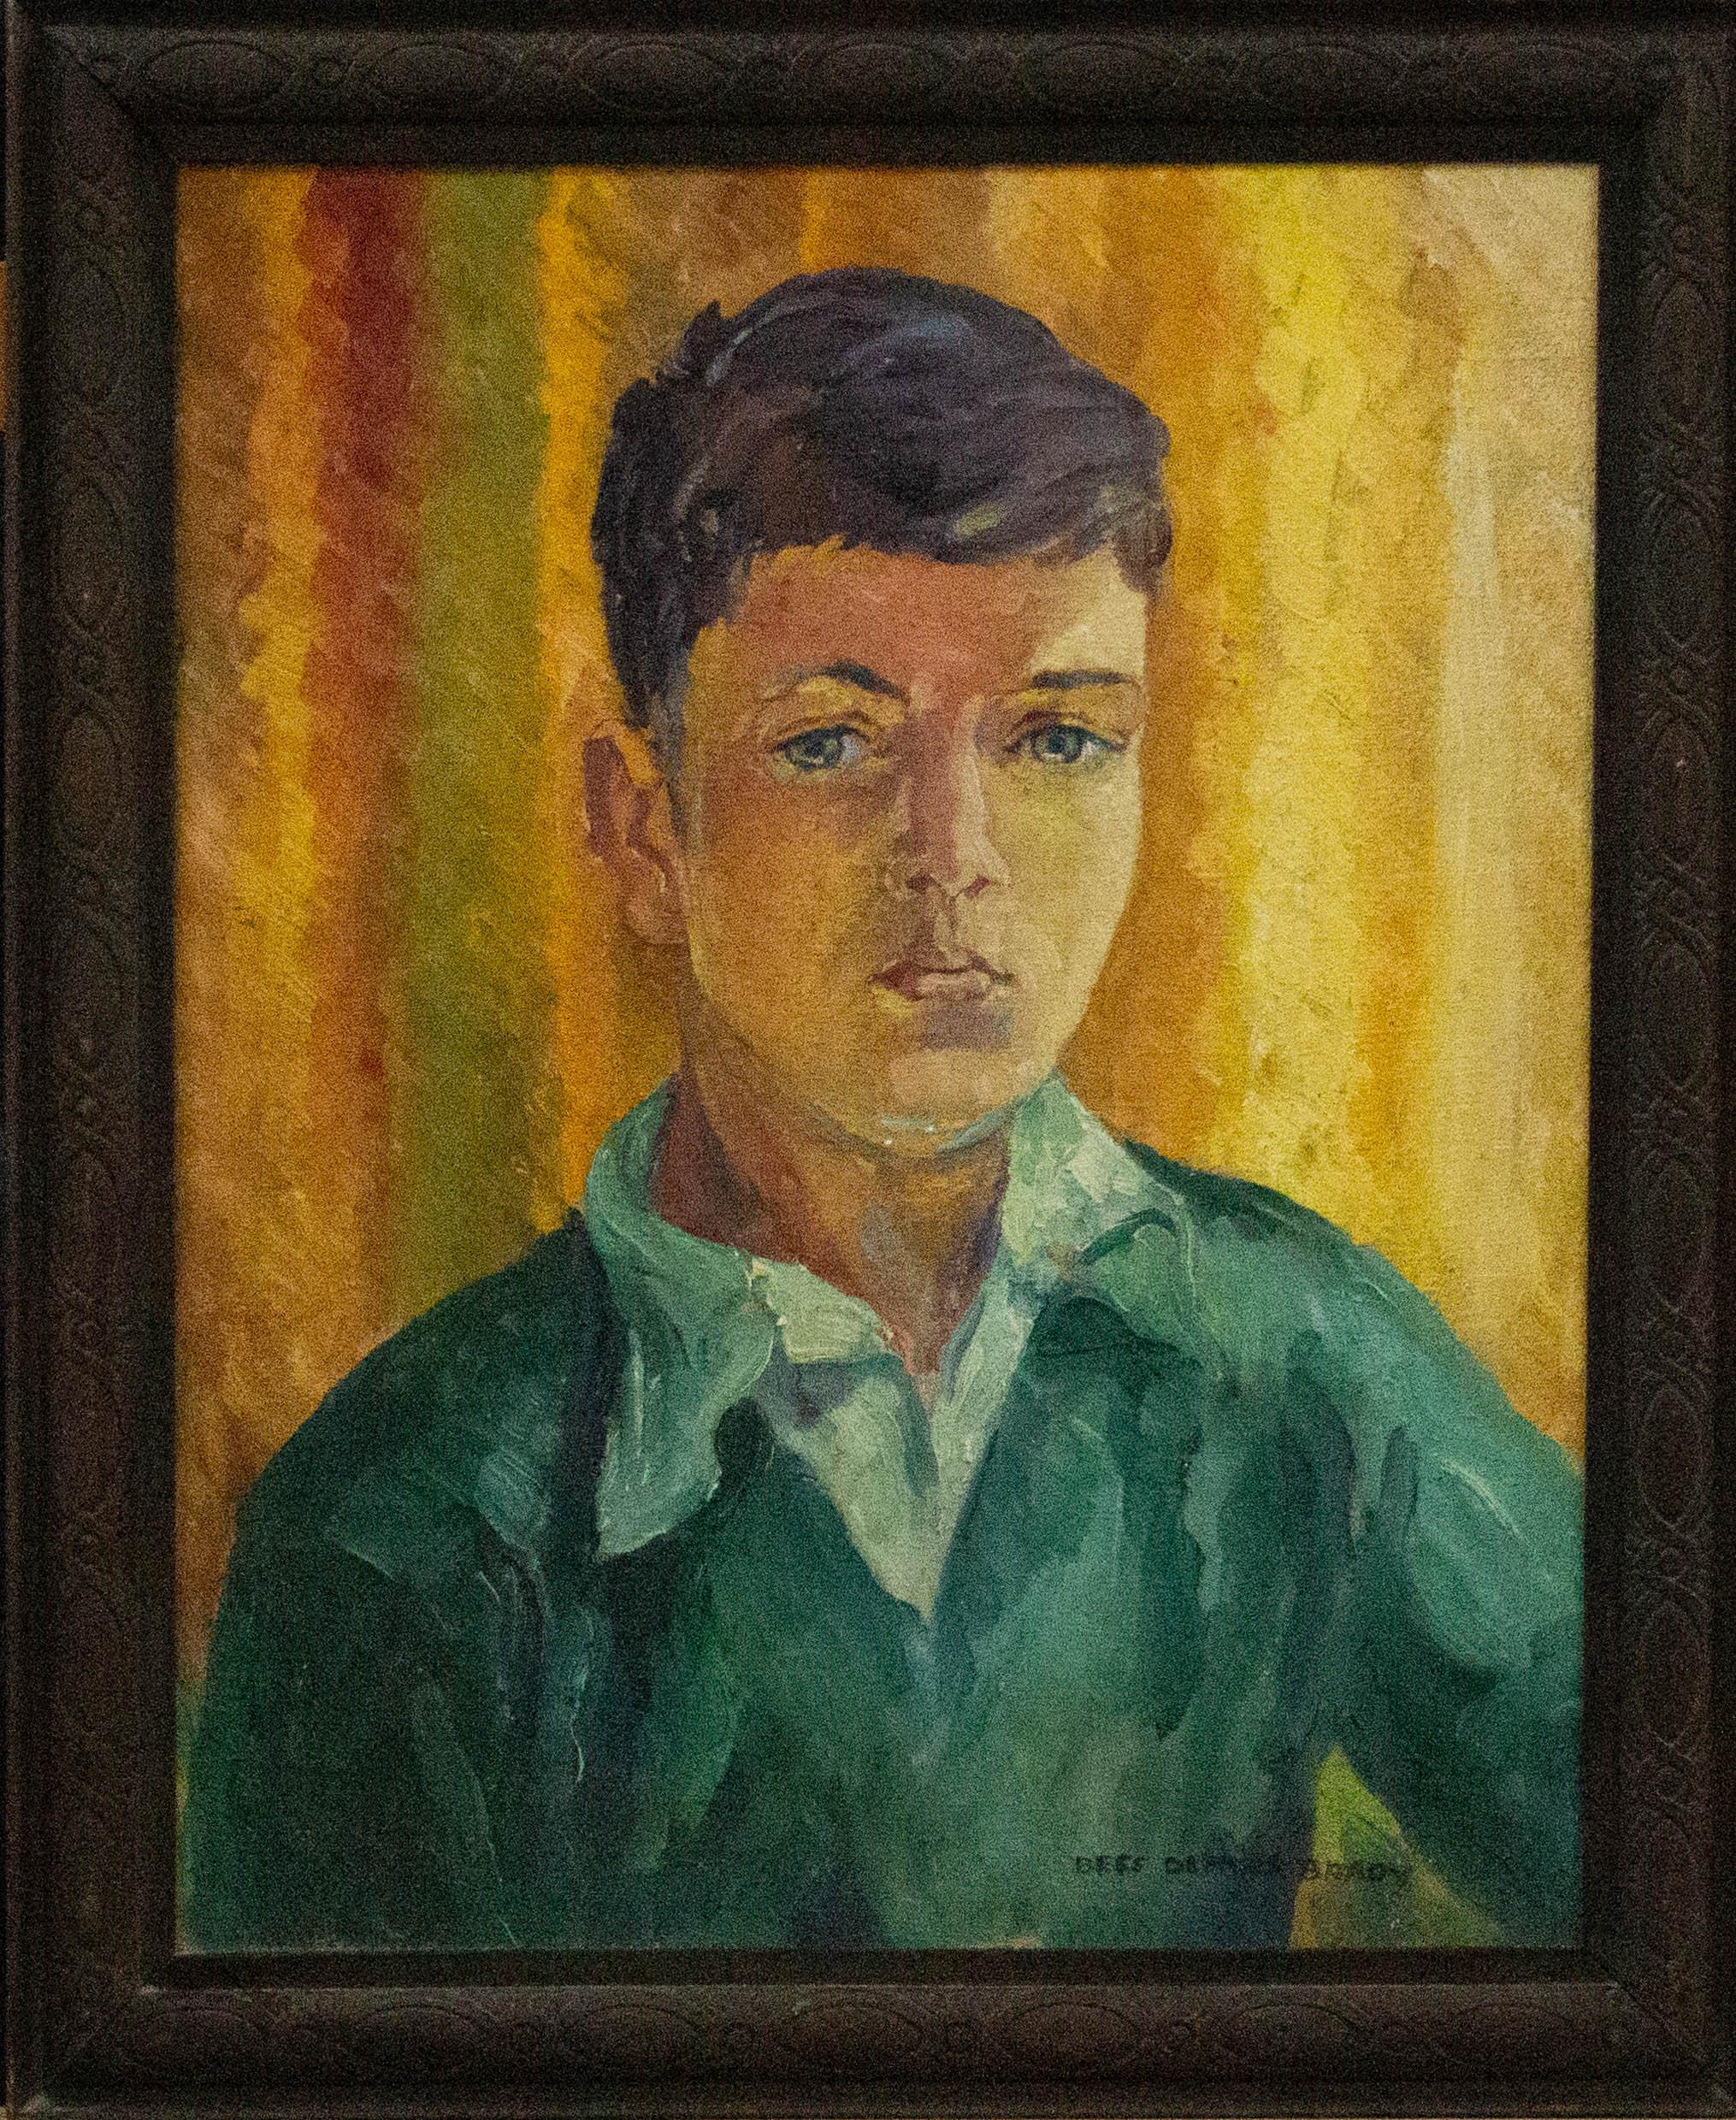 A highly accomplished and colourful portrait of a boy. The fluidity of the background and the sitter's collar contrast with his fixed gaze, all painted with quick and energetic brushstrokes. Presented in an ornate wooden frame. Signed to the